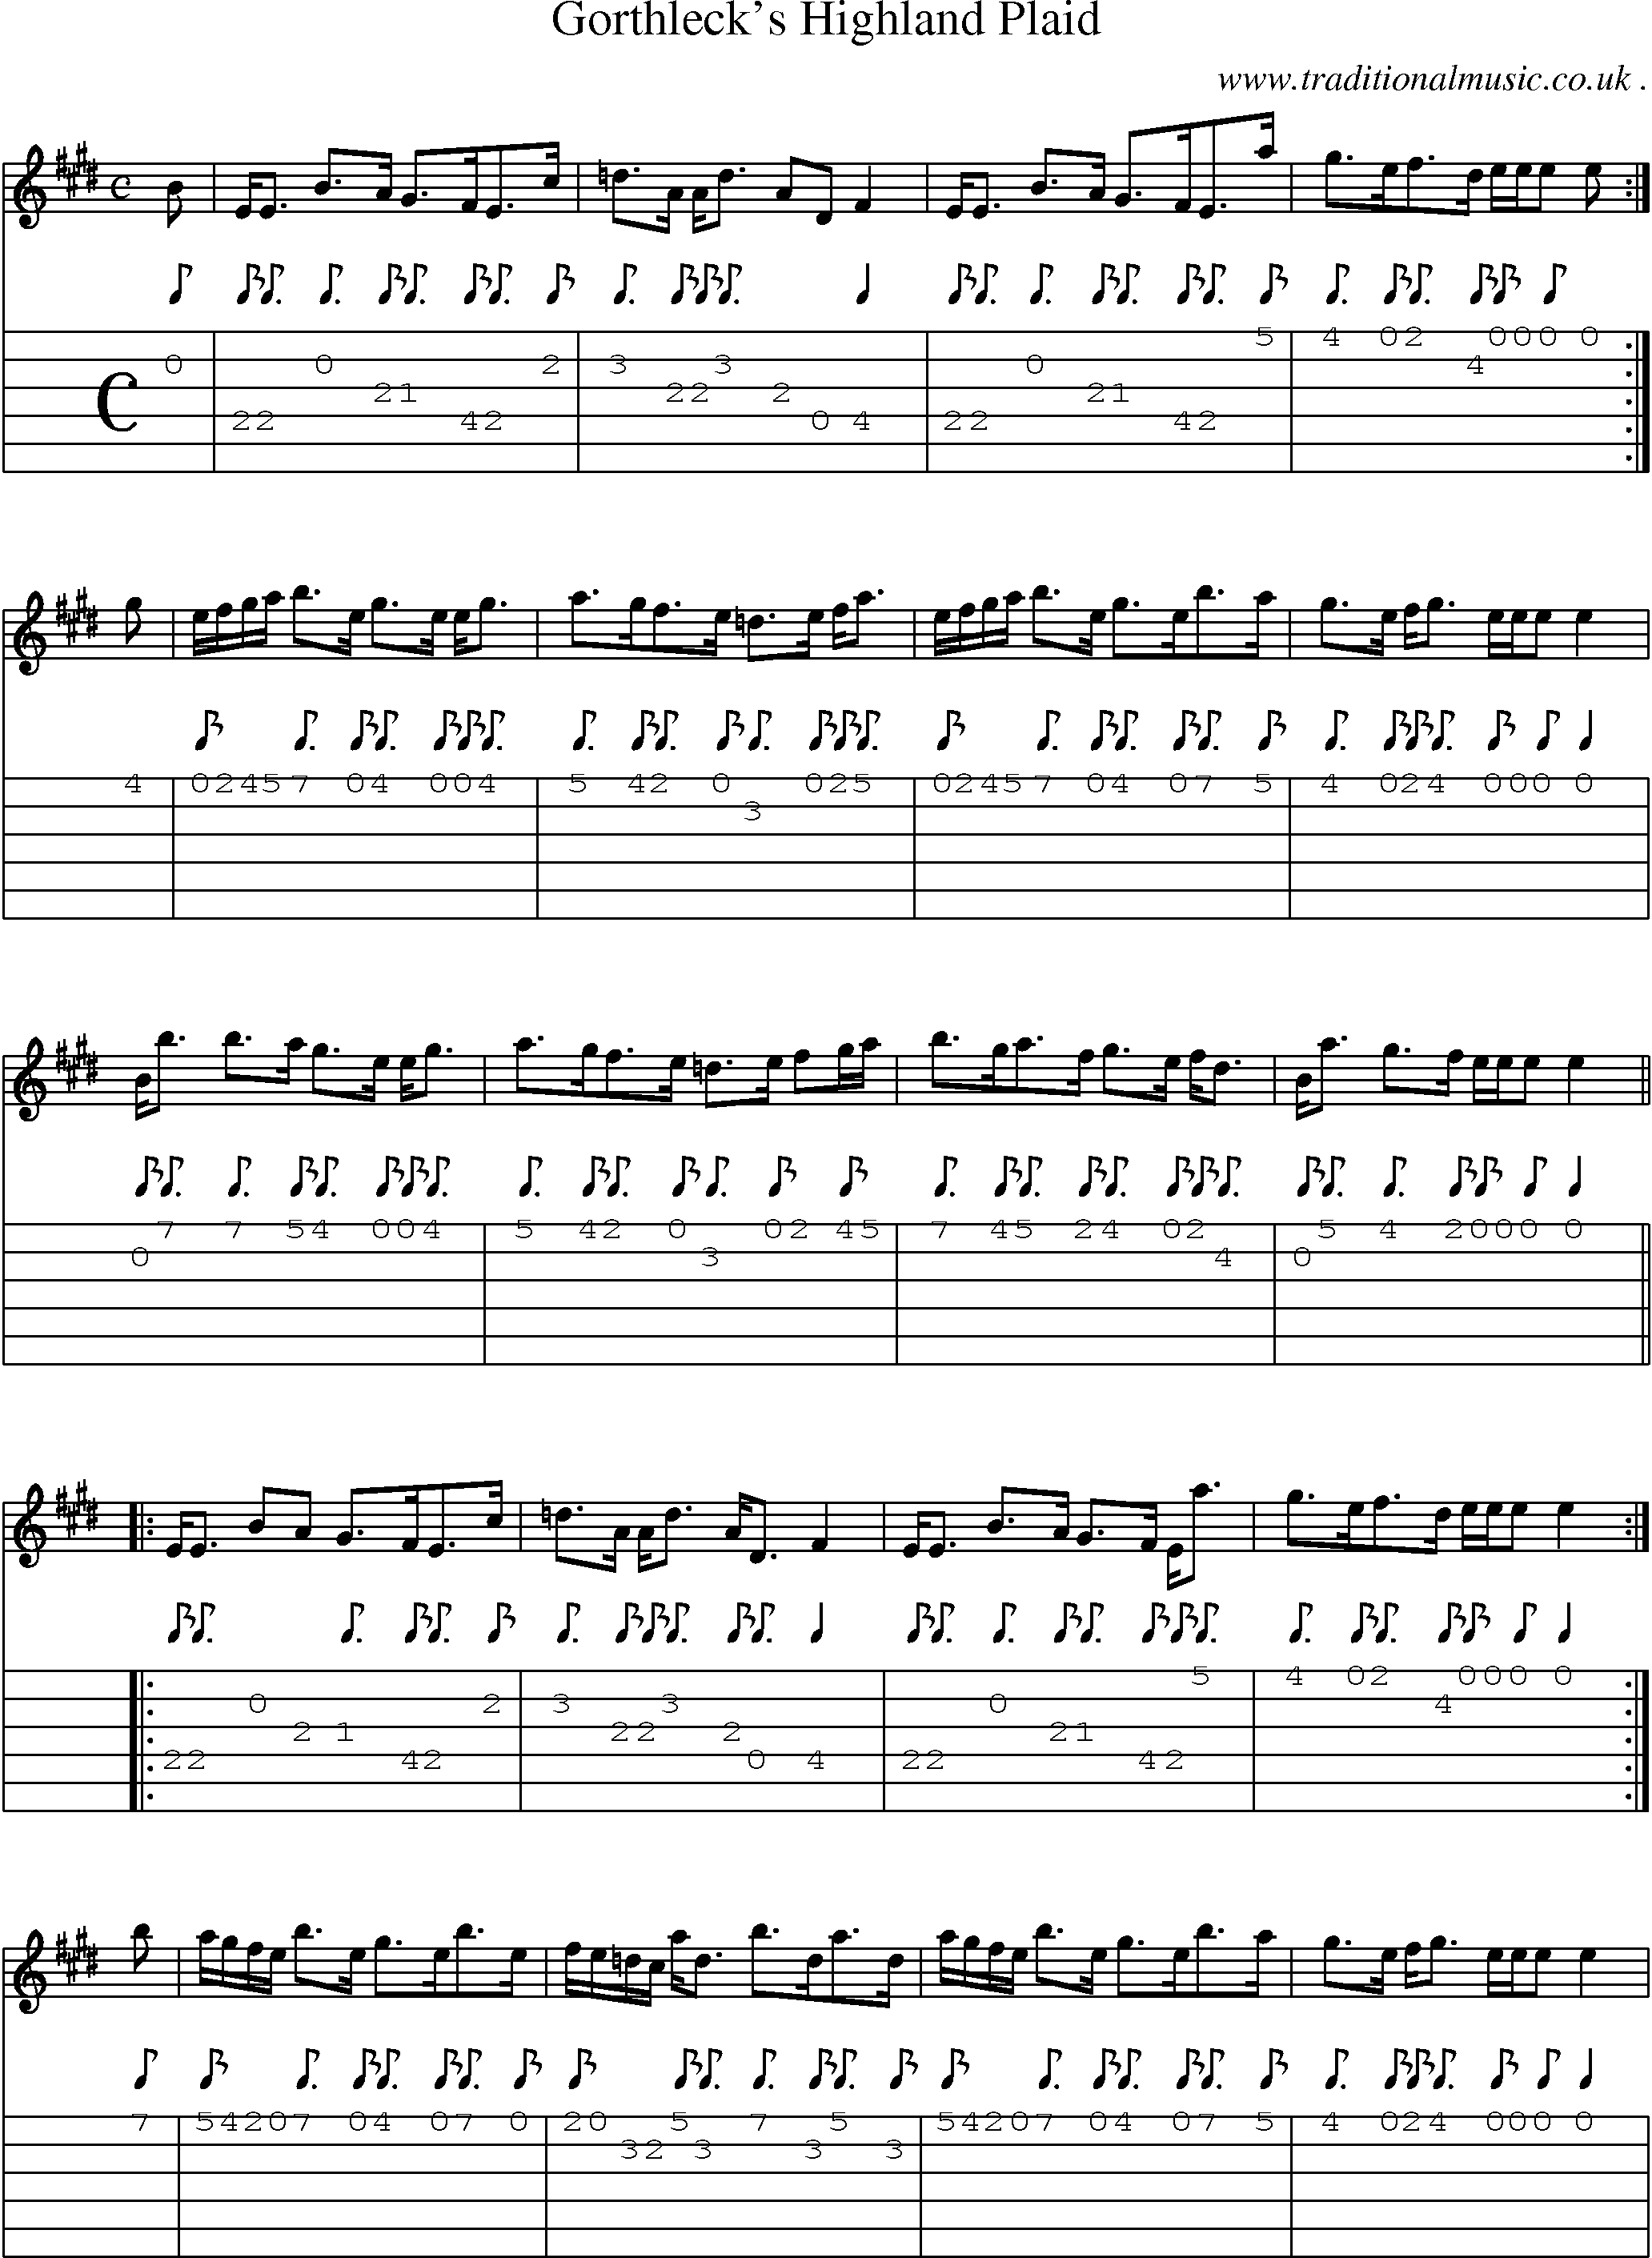 Sheet-music  score, Chords and Guitar Tabs for Gorthlecks Highland Plaid